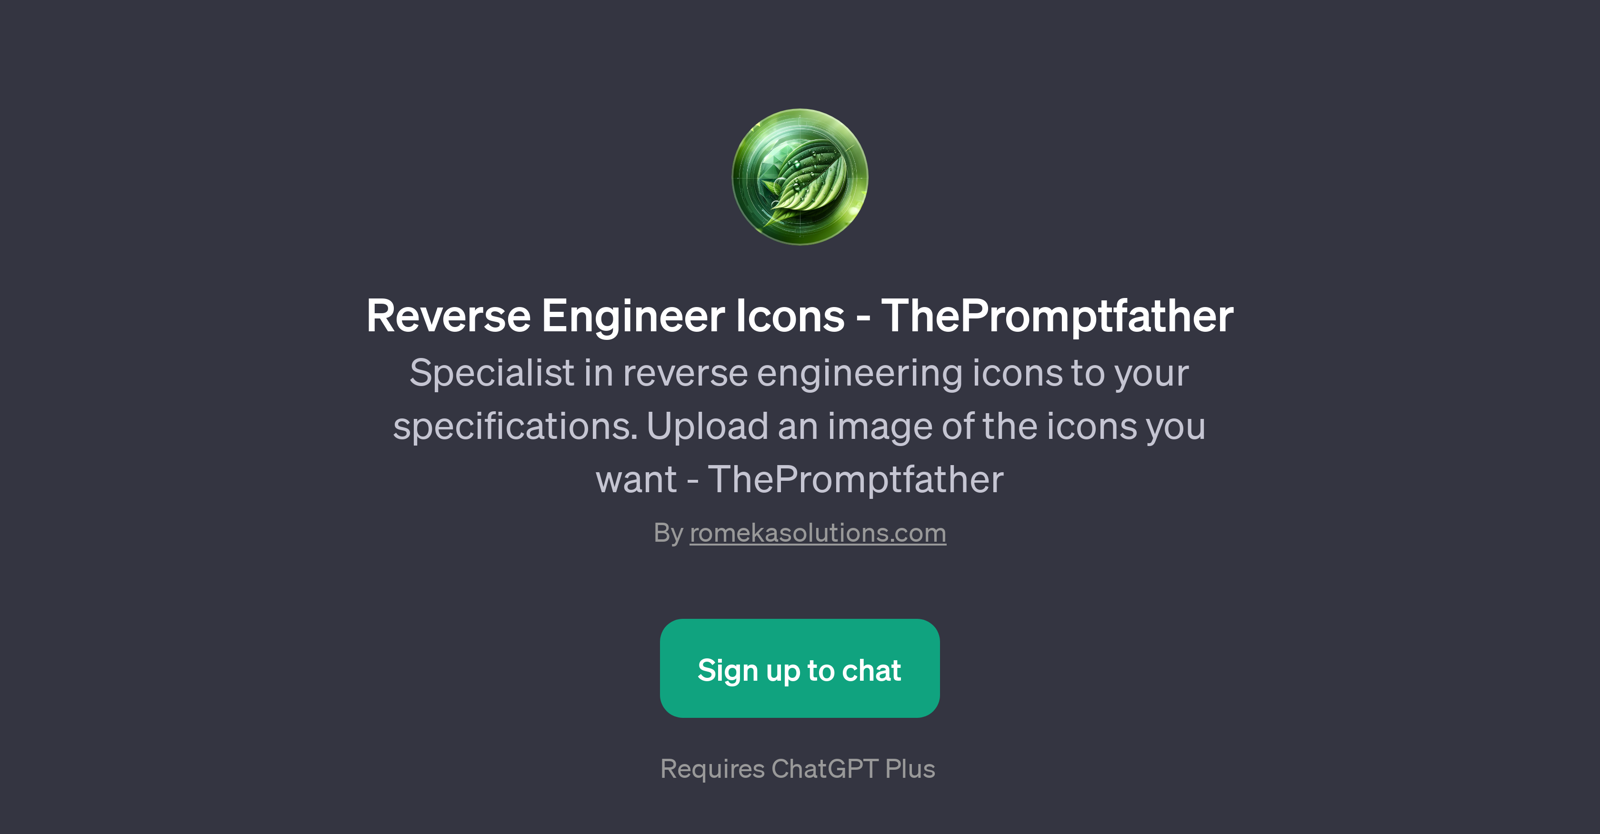 Reverse Engineer Icons - ThePromptfather website